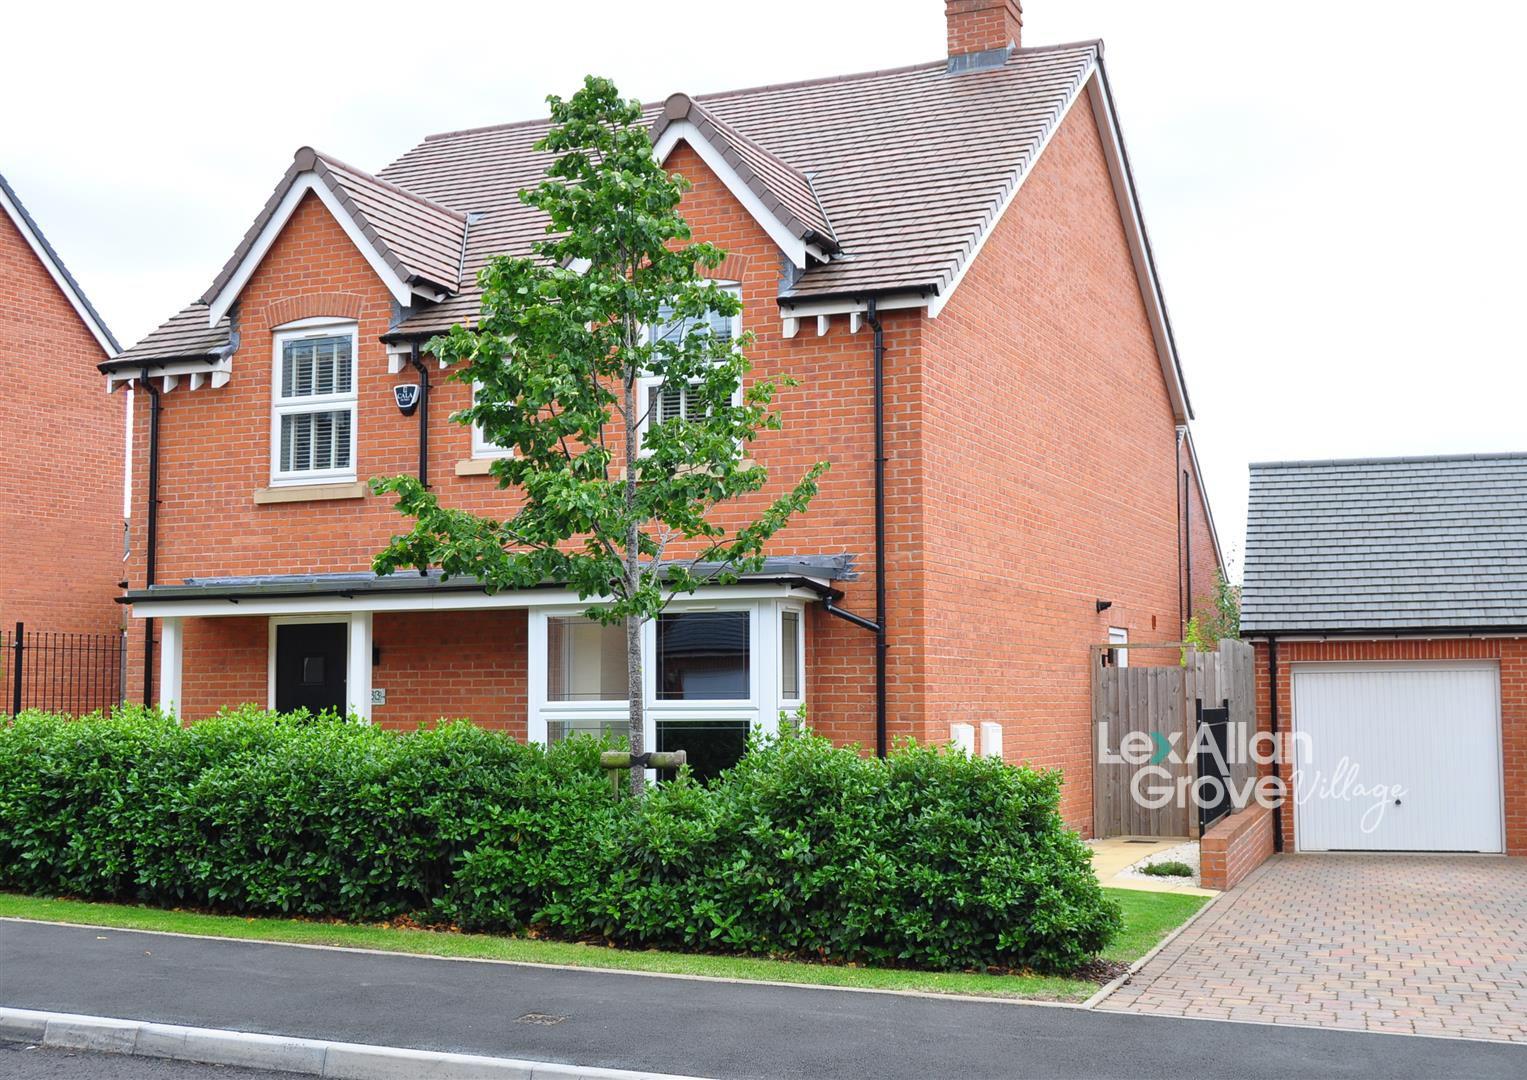 4 bed detached house for sale in Bennett Drive, Stourbridge, DY9 